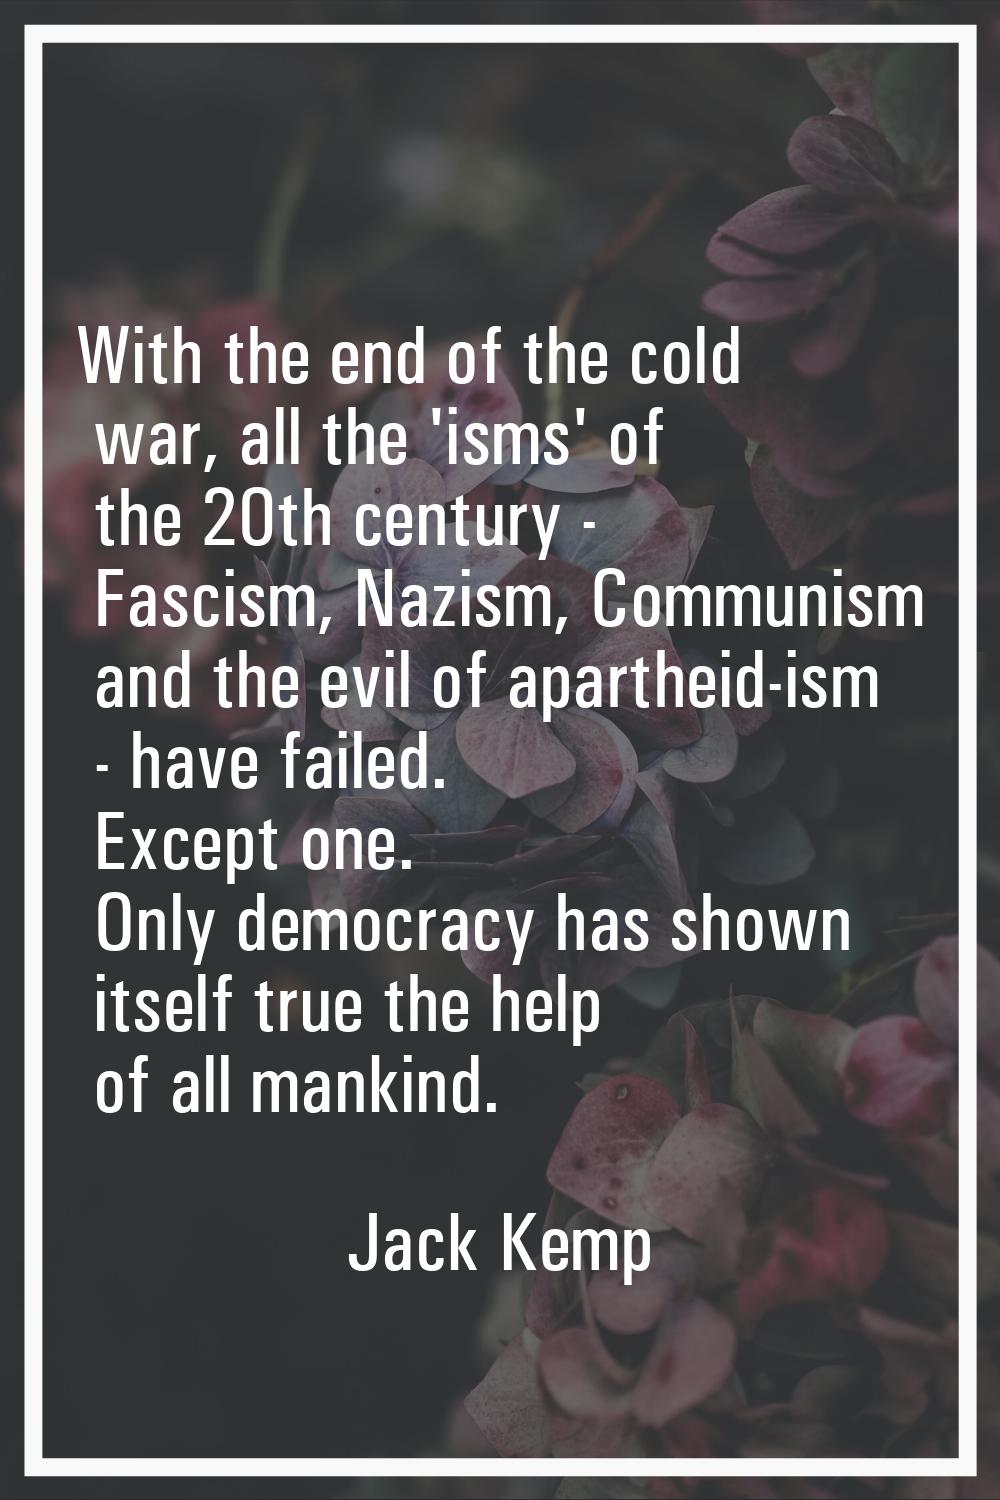 With the end of the cold war, all the 'isms' of the 20th century - Fascism, Nazism, Communism and t